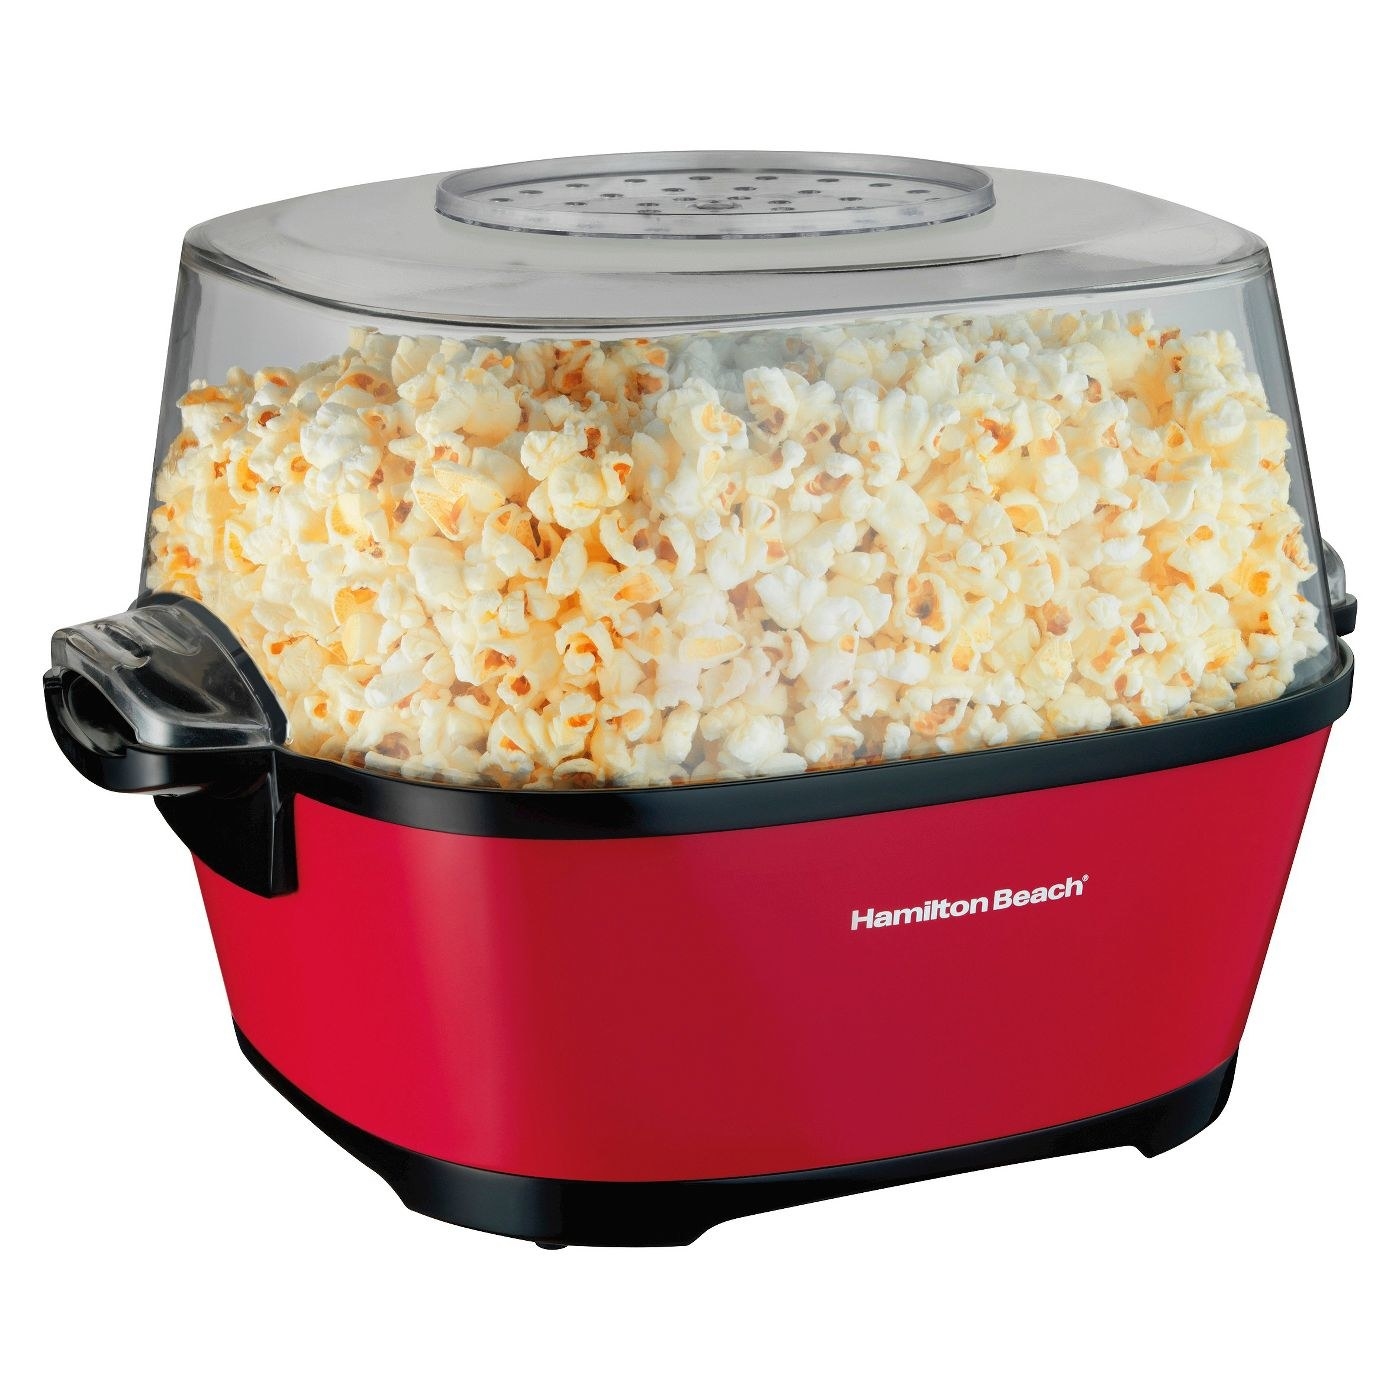 The electric popcorn maker